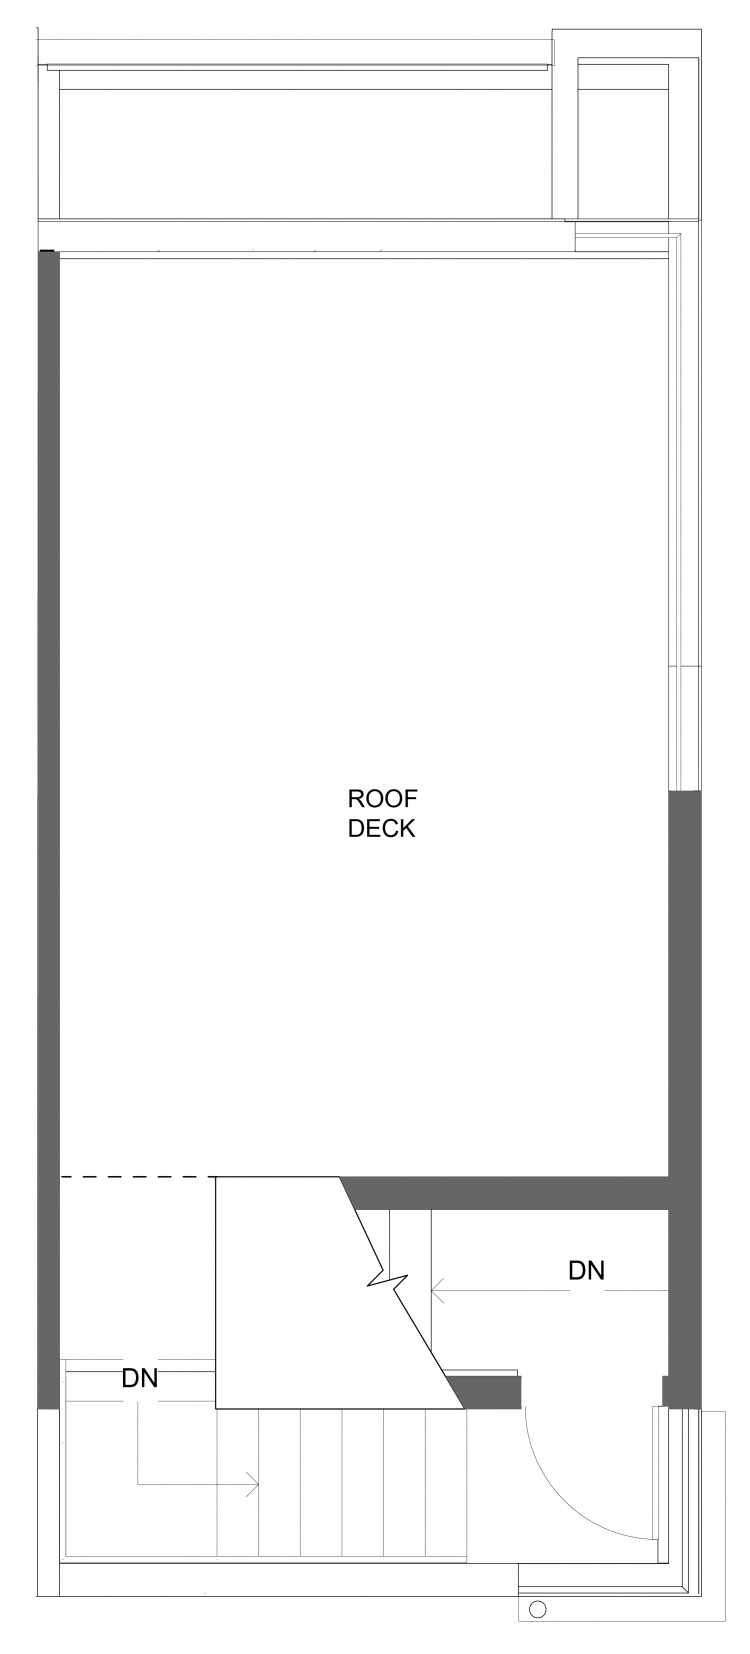 Roof Deck Floor Plan of 1539 Grandview Pl E, One of the Larrabee Townhomes in Capitol Hill